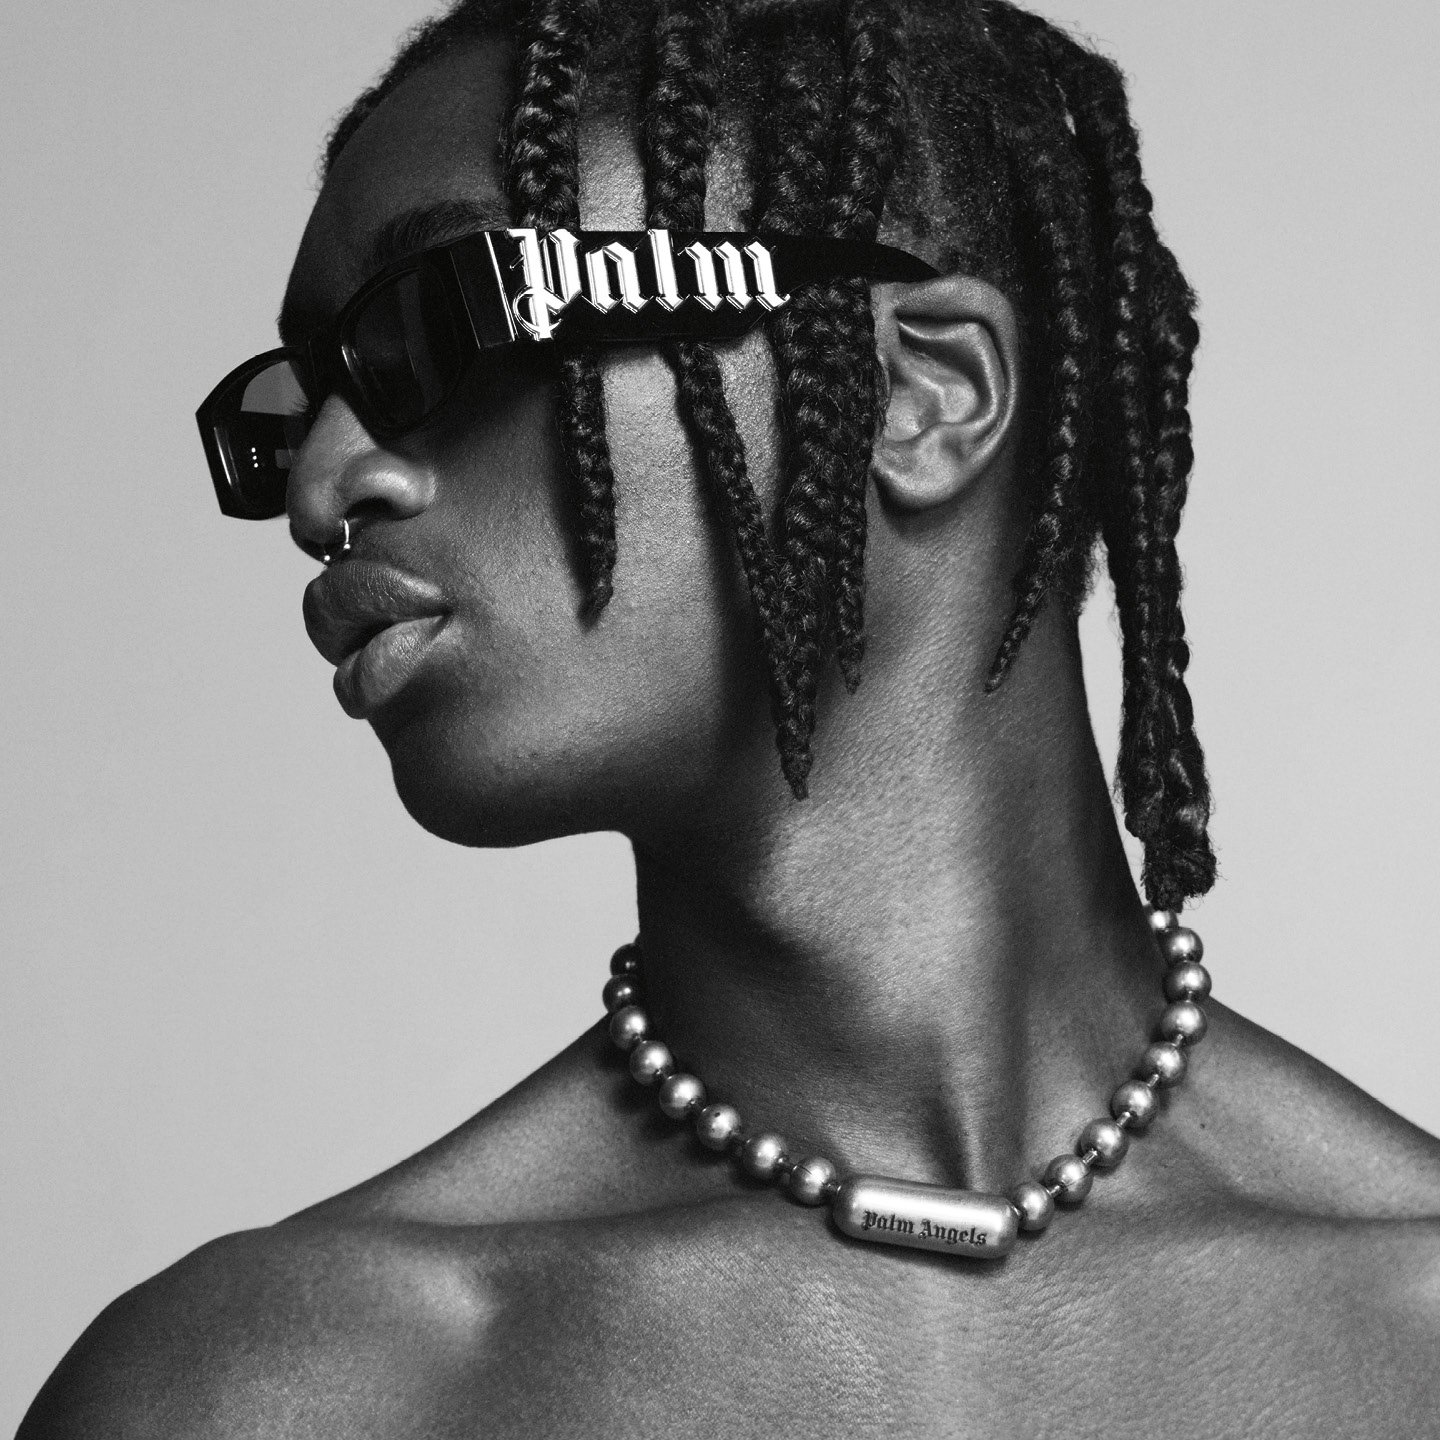 Palm Angeles launches first full eyewear collection